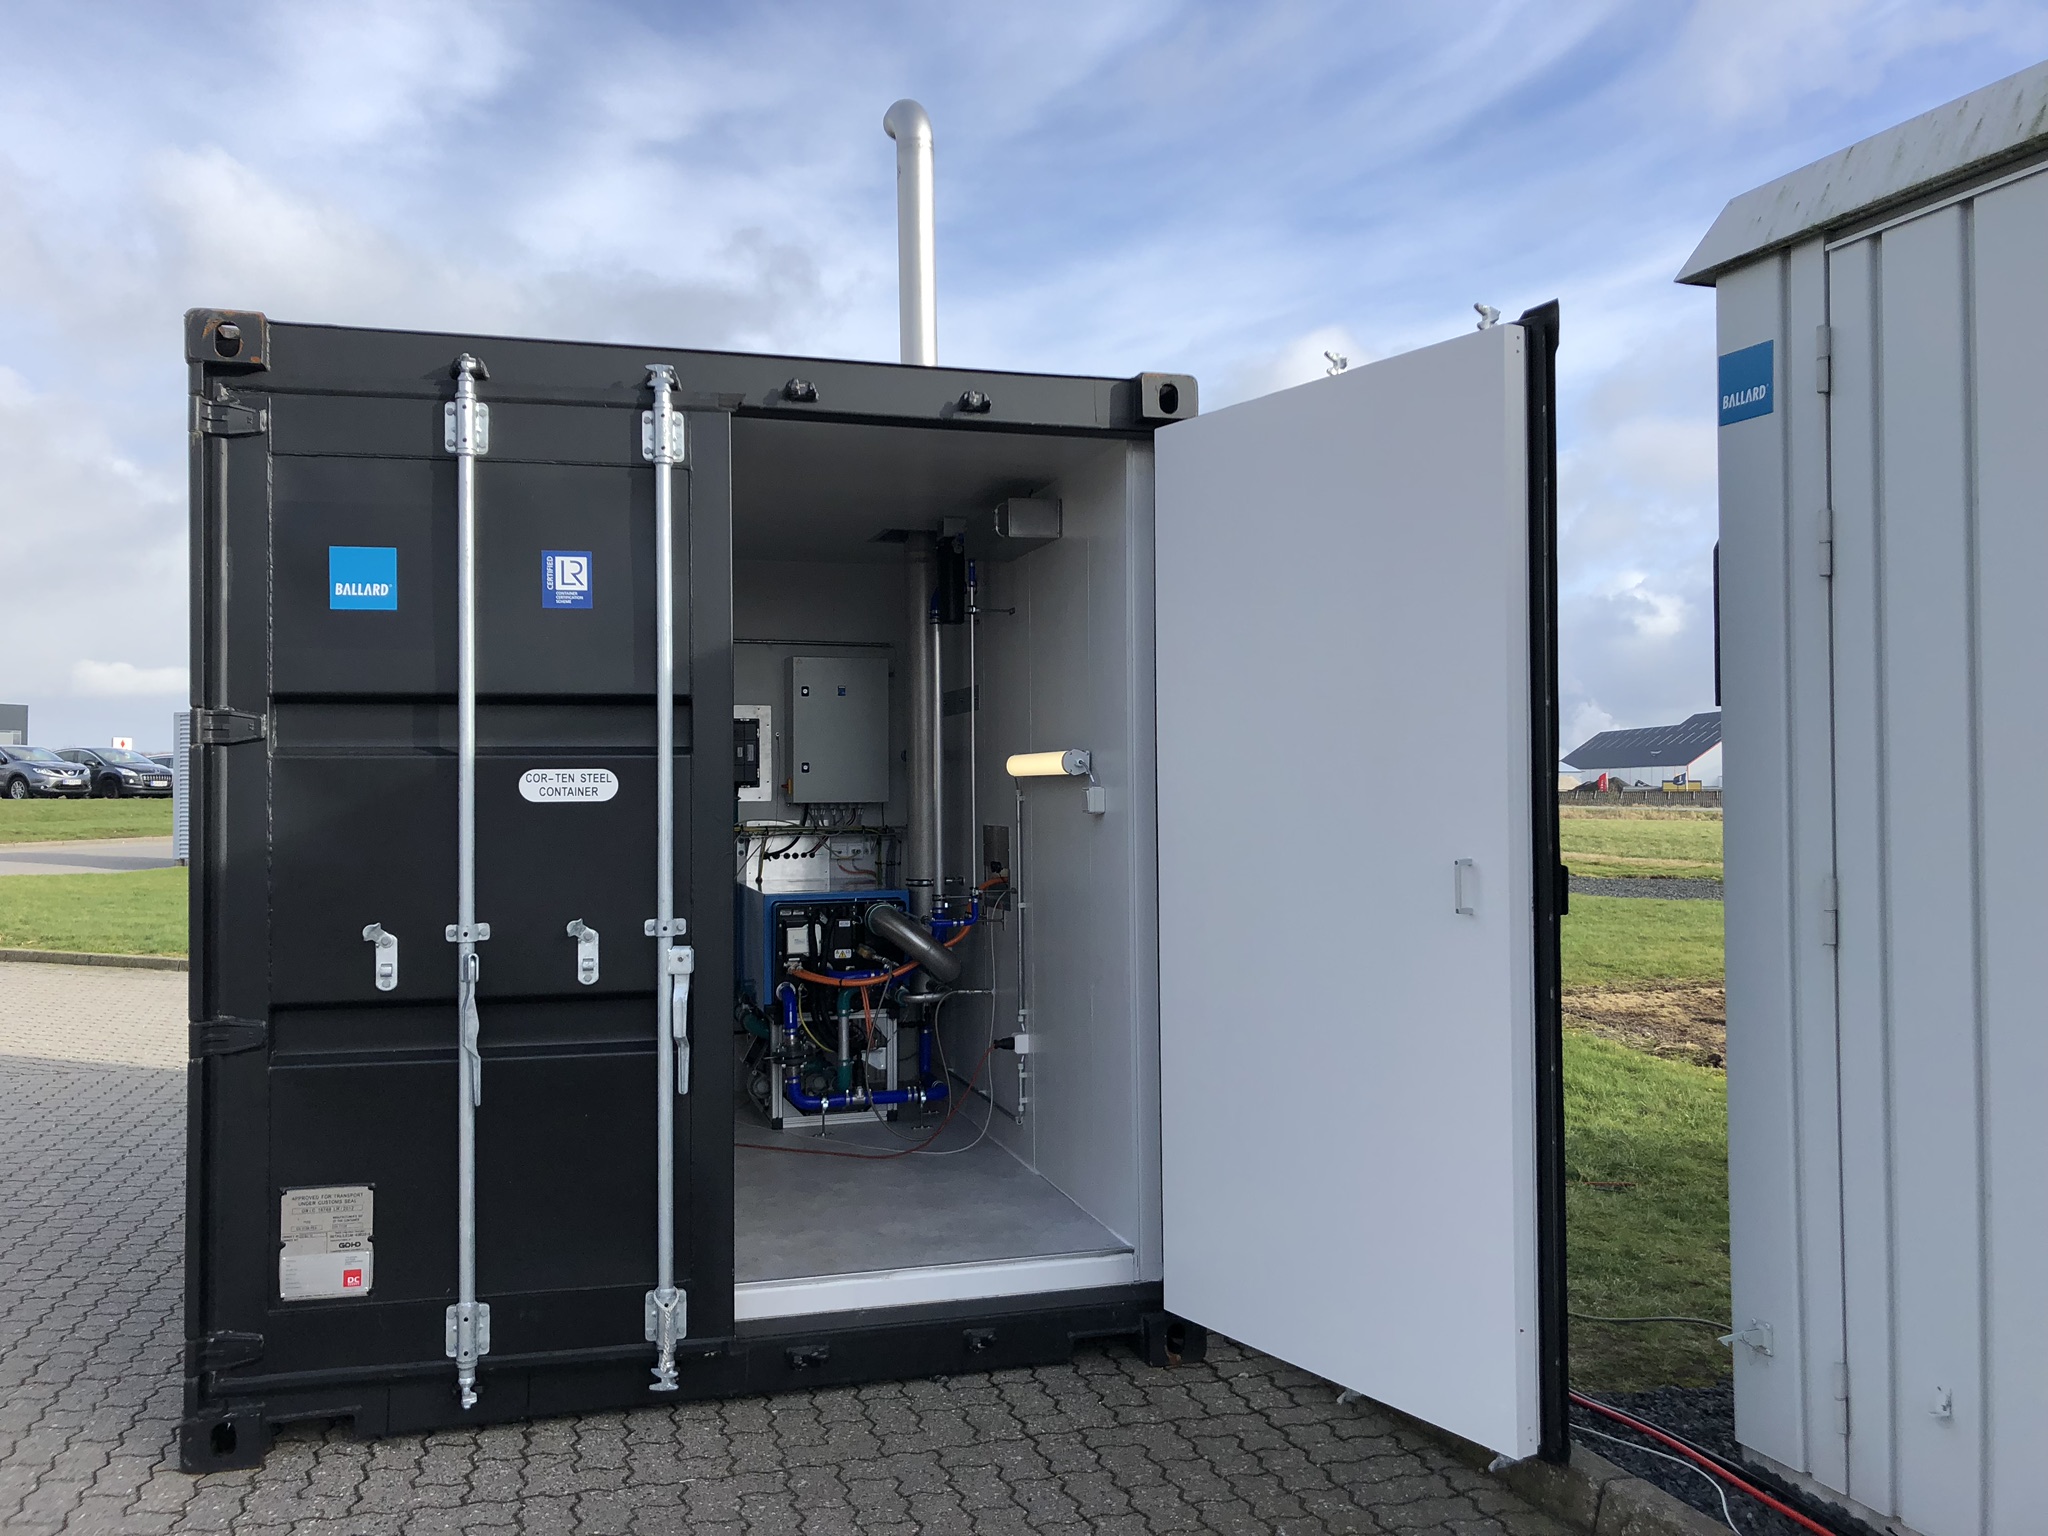 A fuel cell was shipped from Ballard in Denmark to Kongsberg in Norway